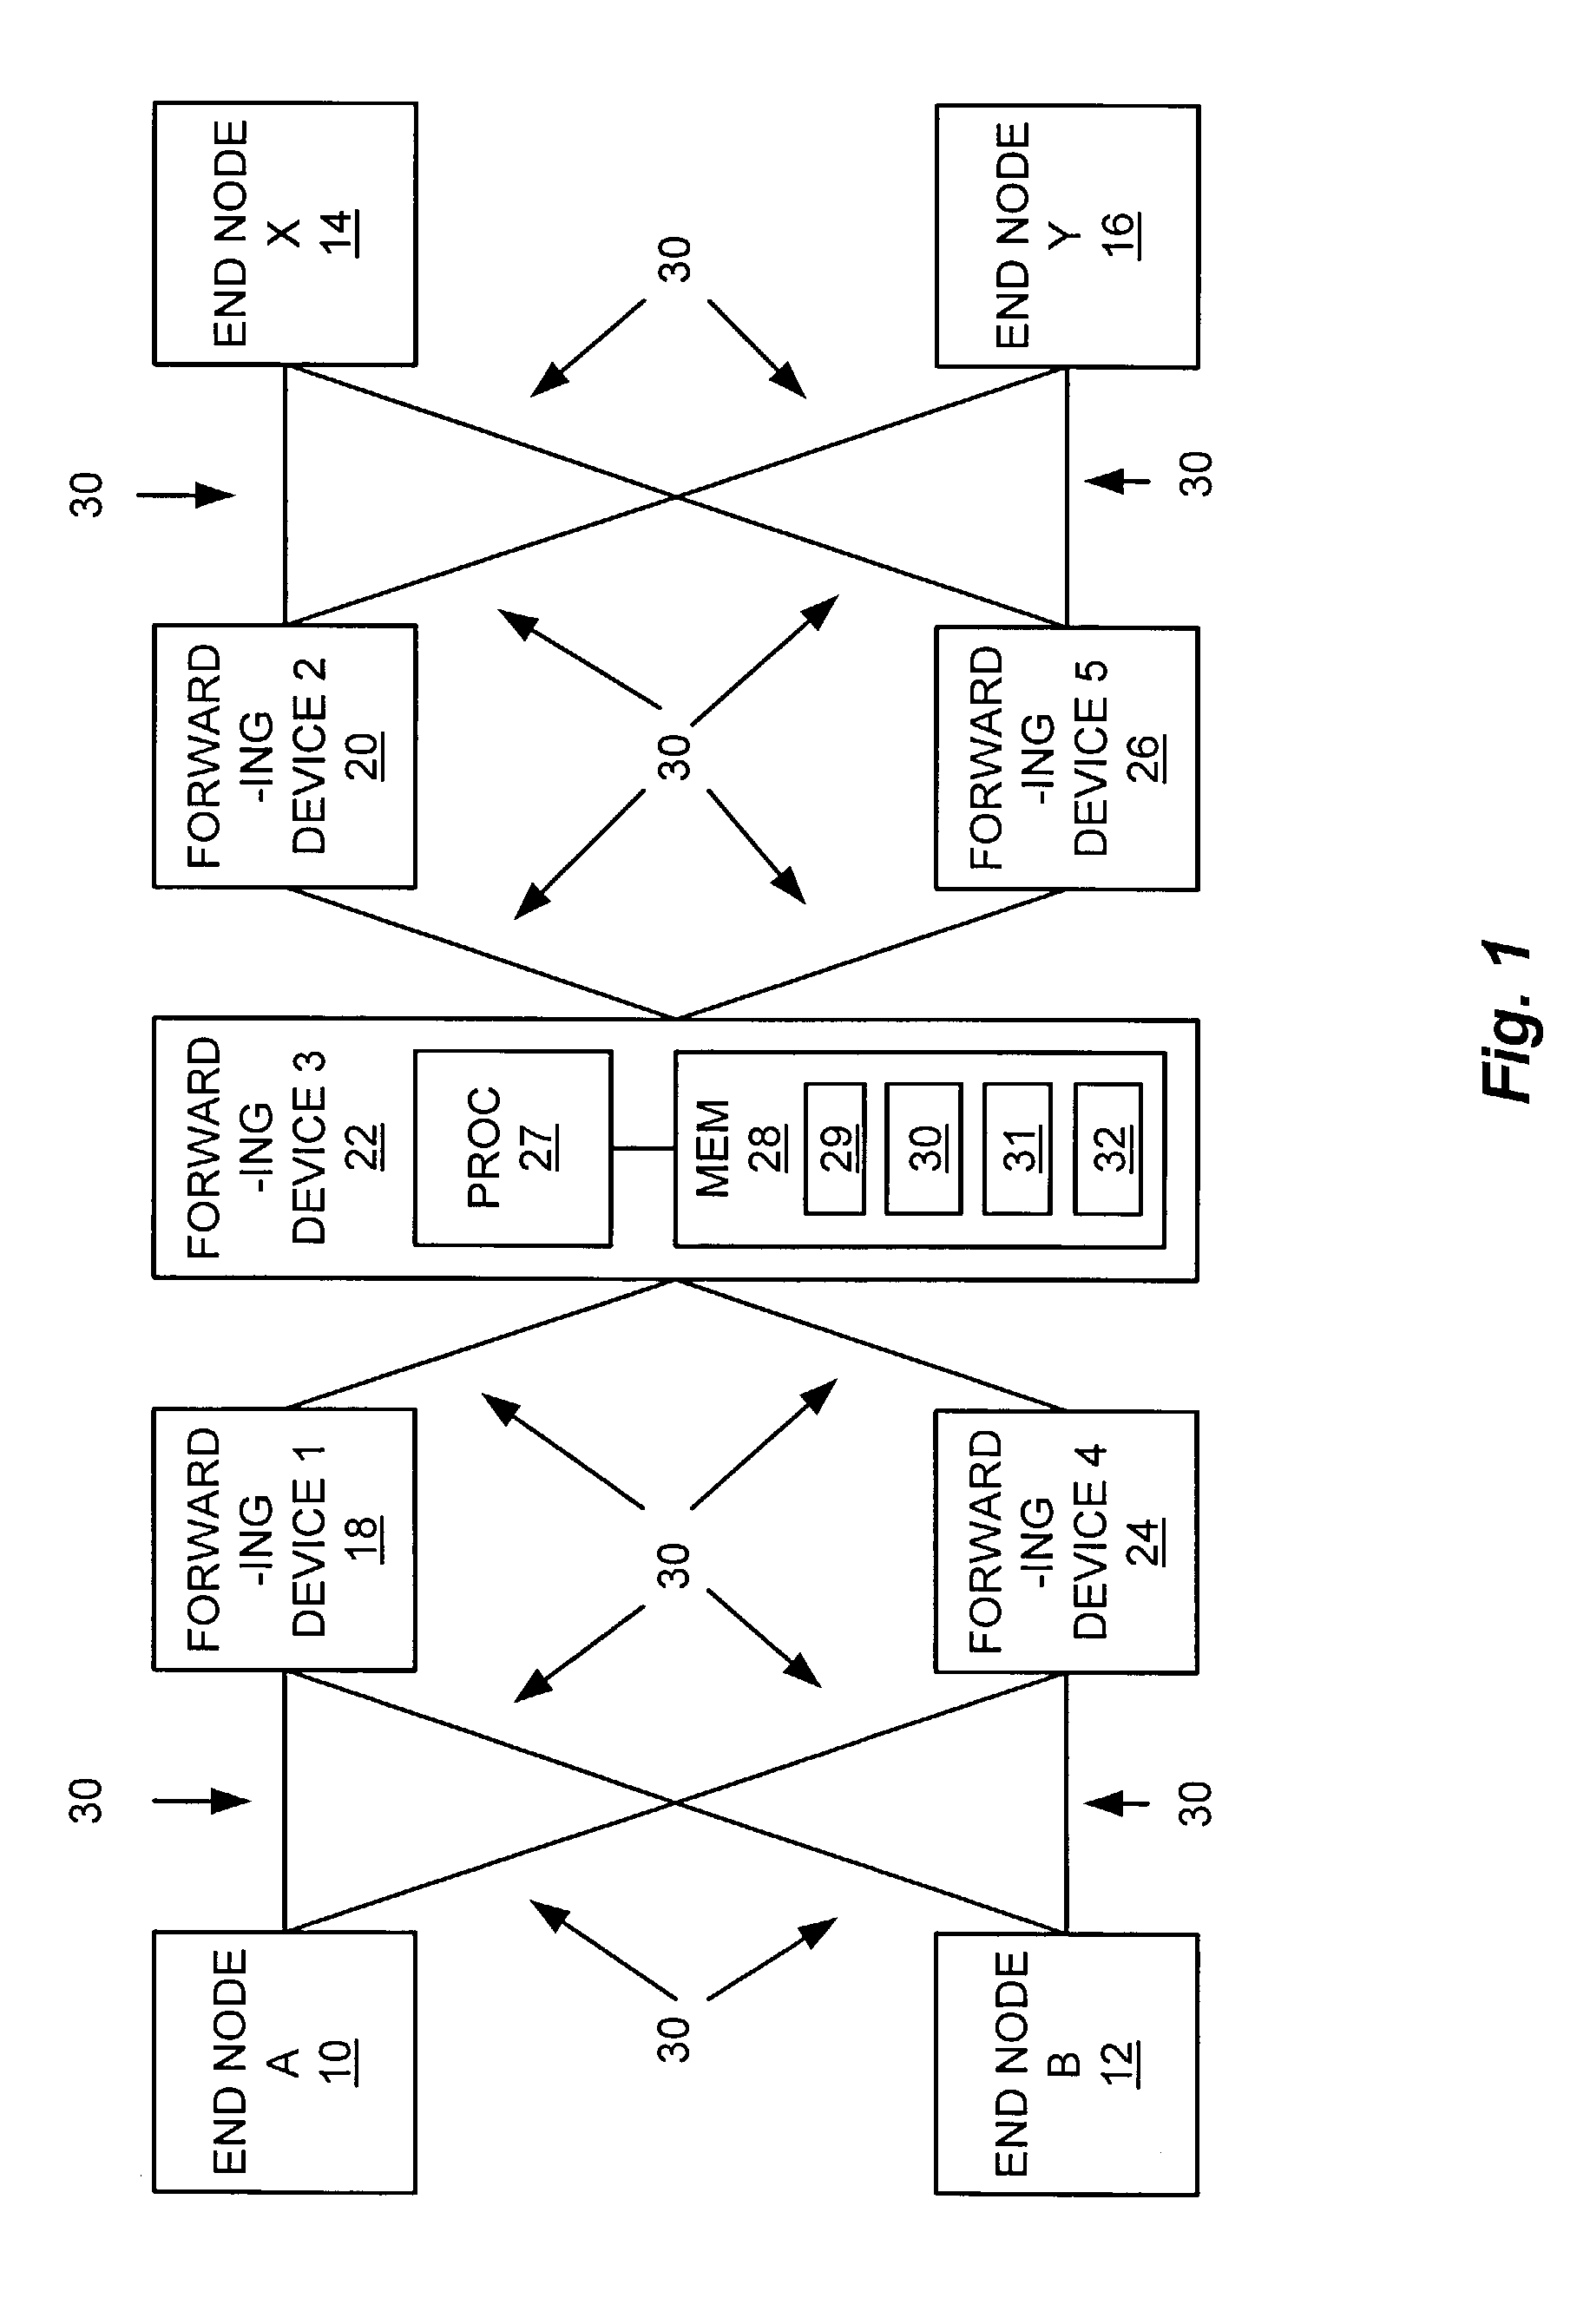 Calculation of layered routes in a distributed manner